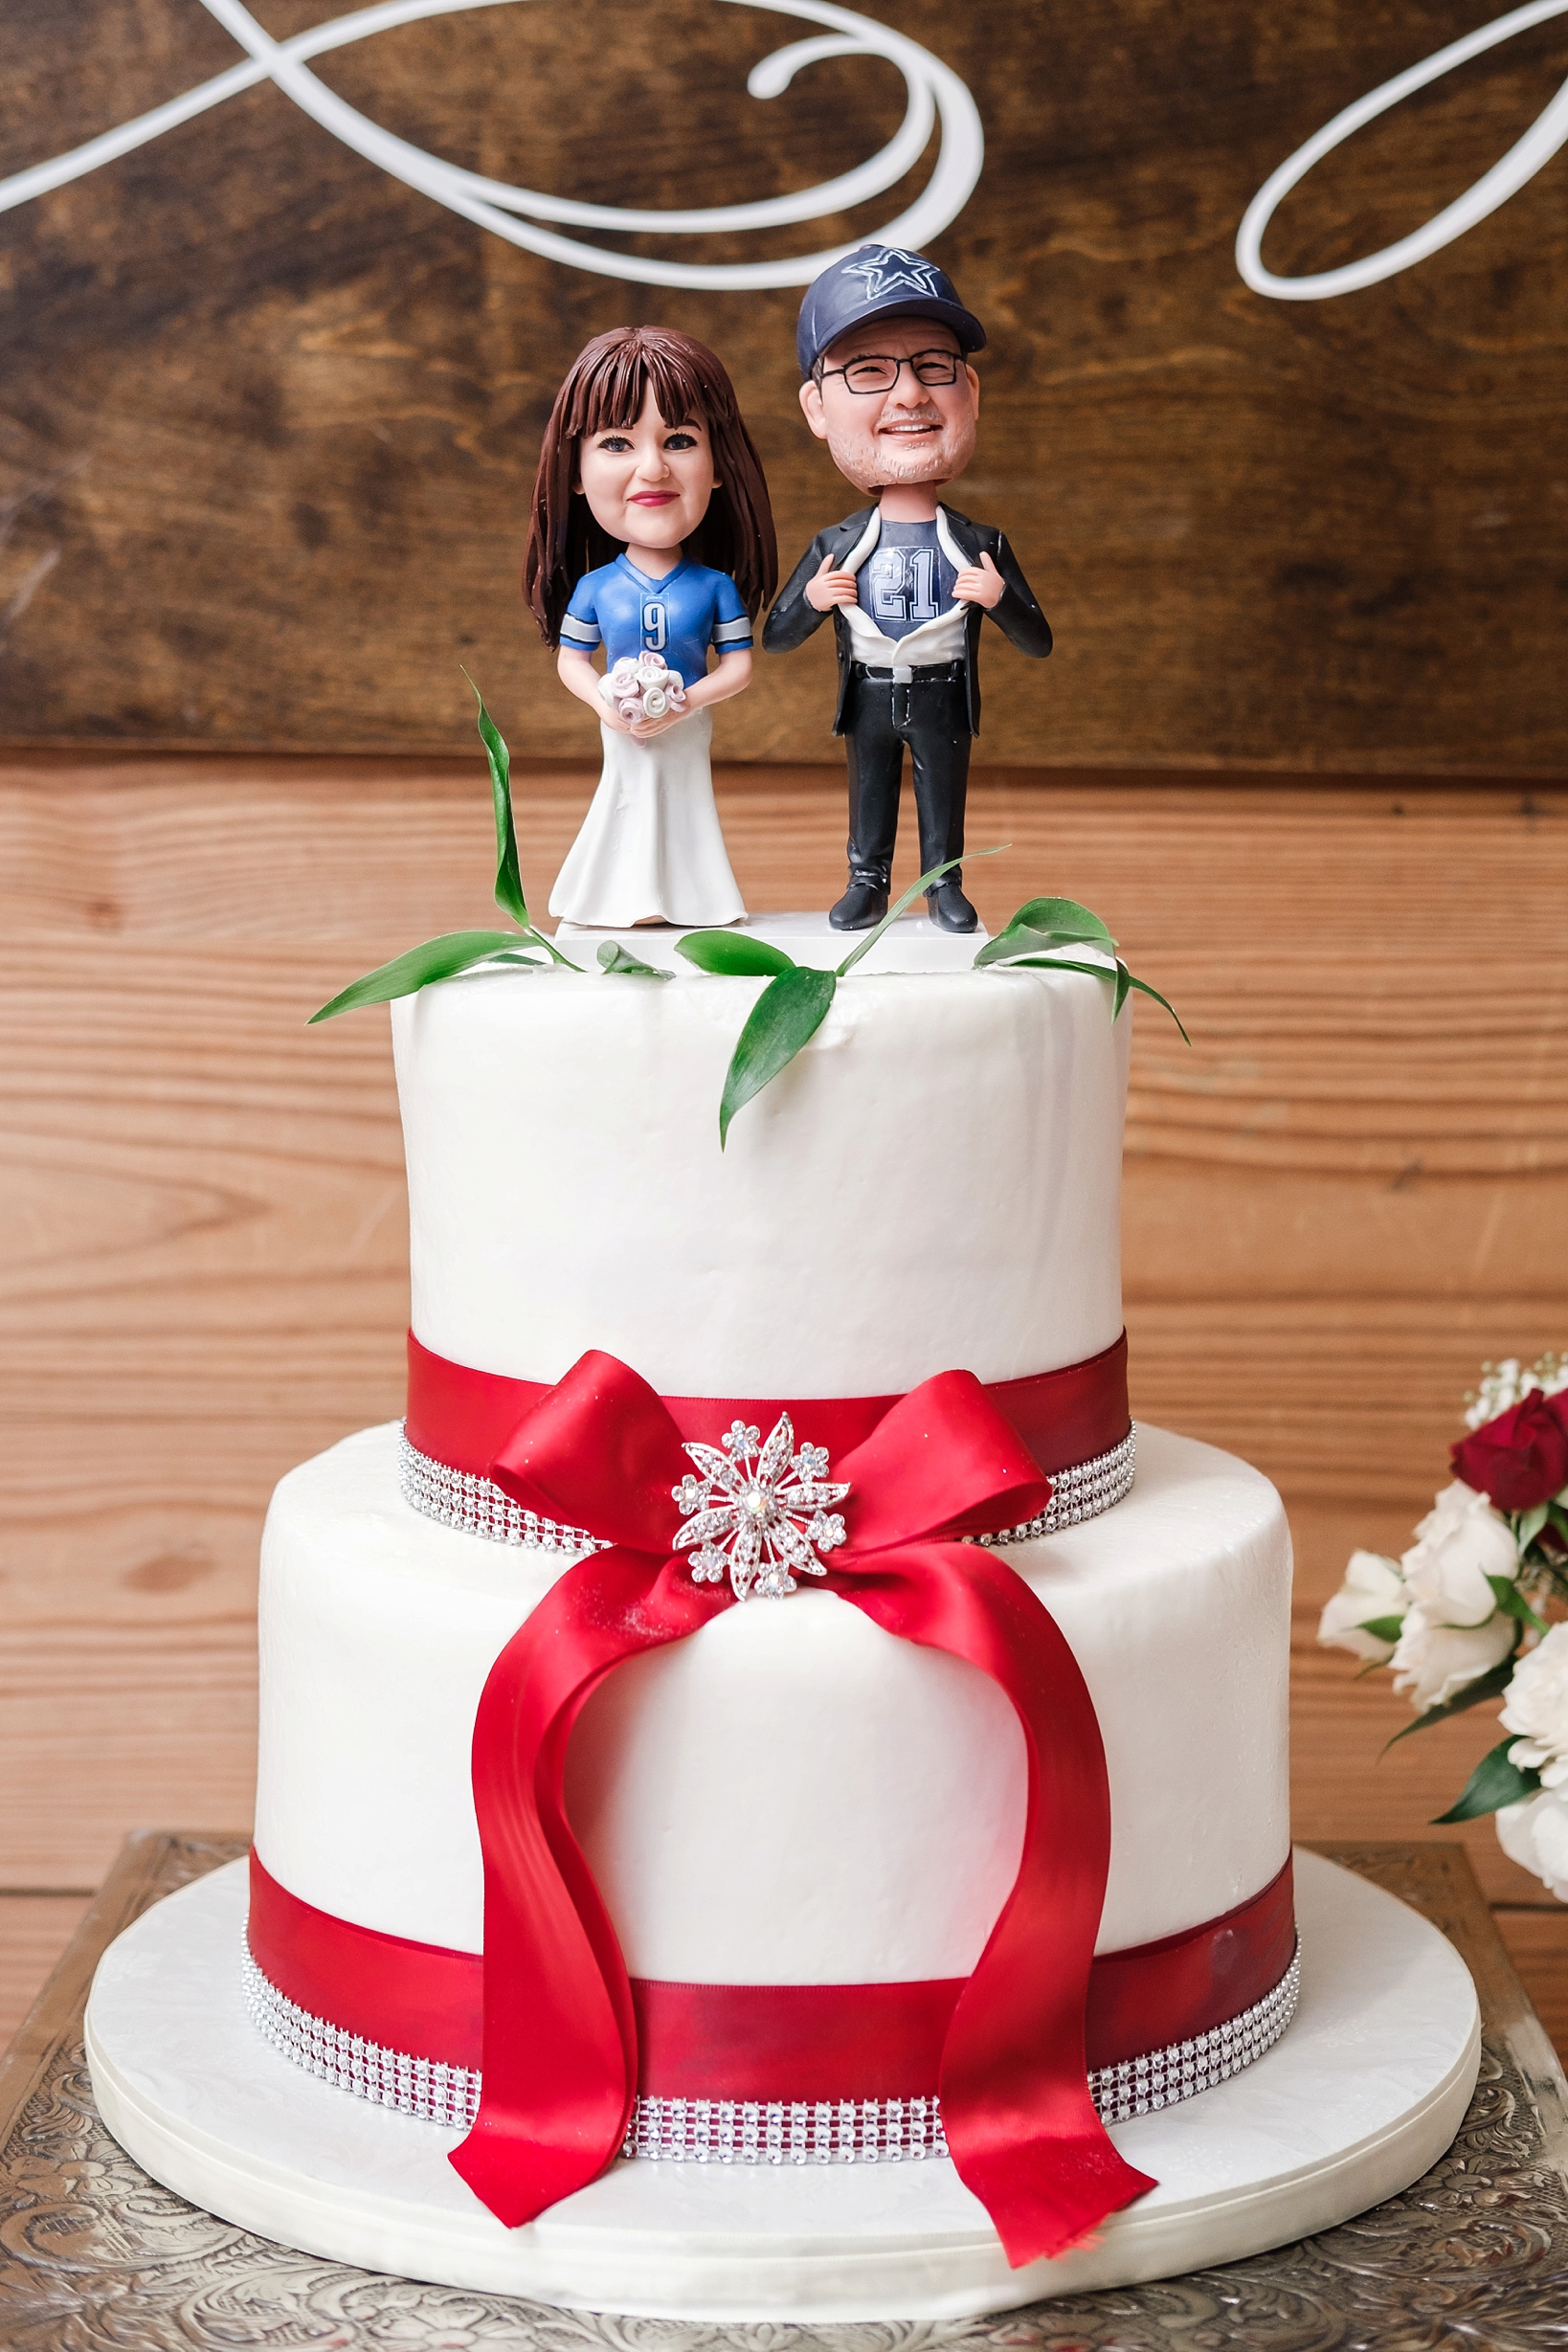 Custom made bobbleheads sit atop the wedding cake with bright red ribbon wrapping the base